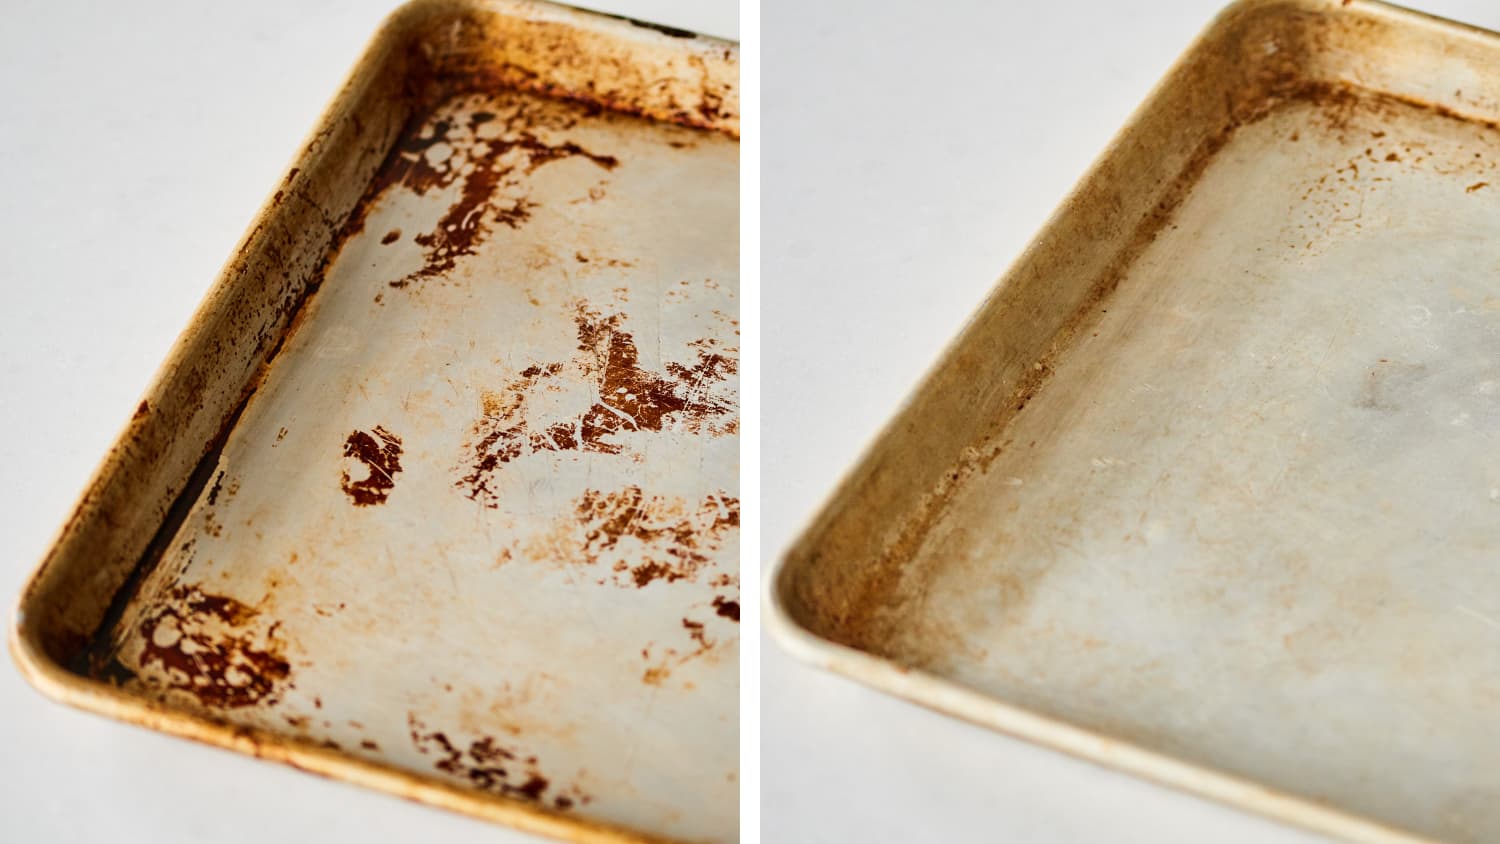 My baking sheet is rusty, but it isn't that bad. Can I still use it? - Quora